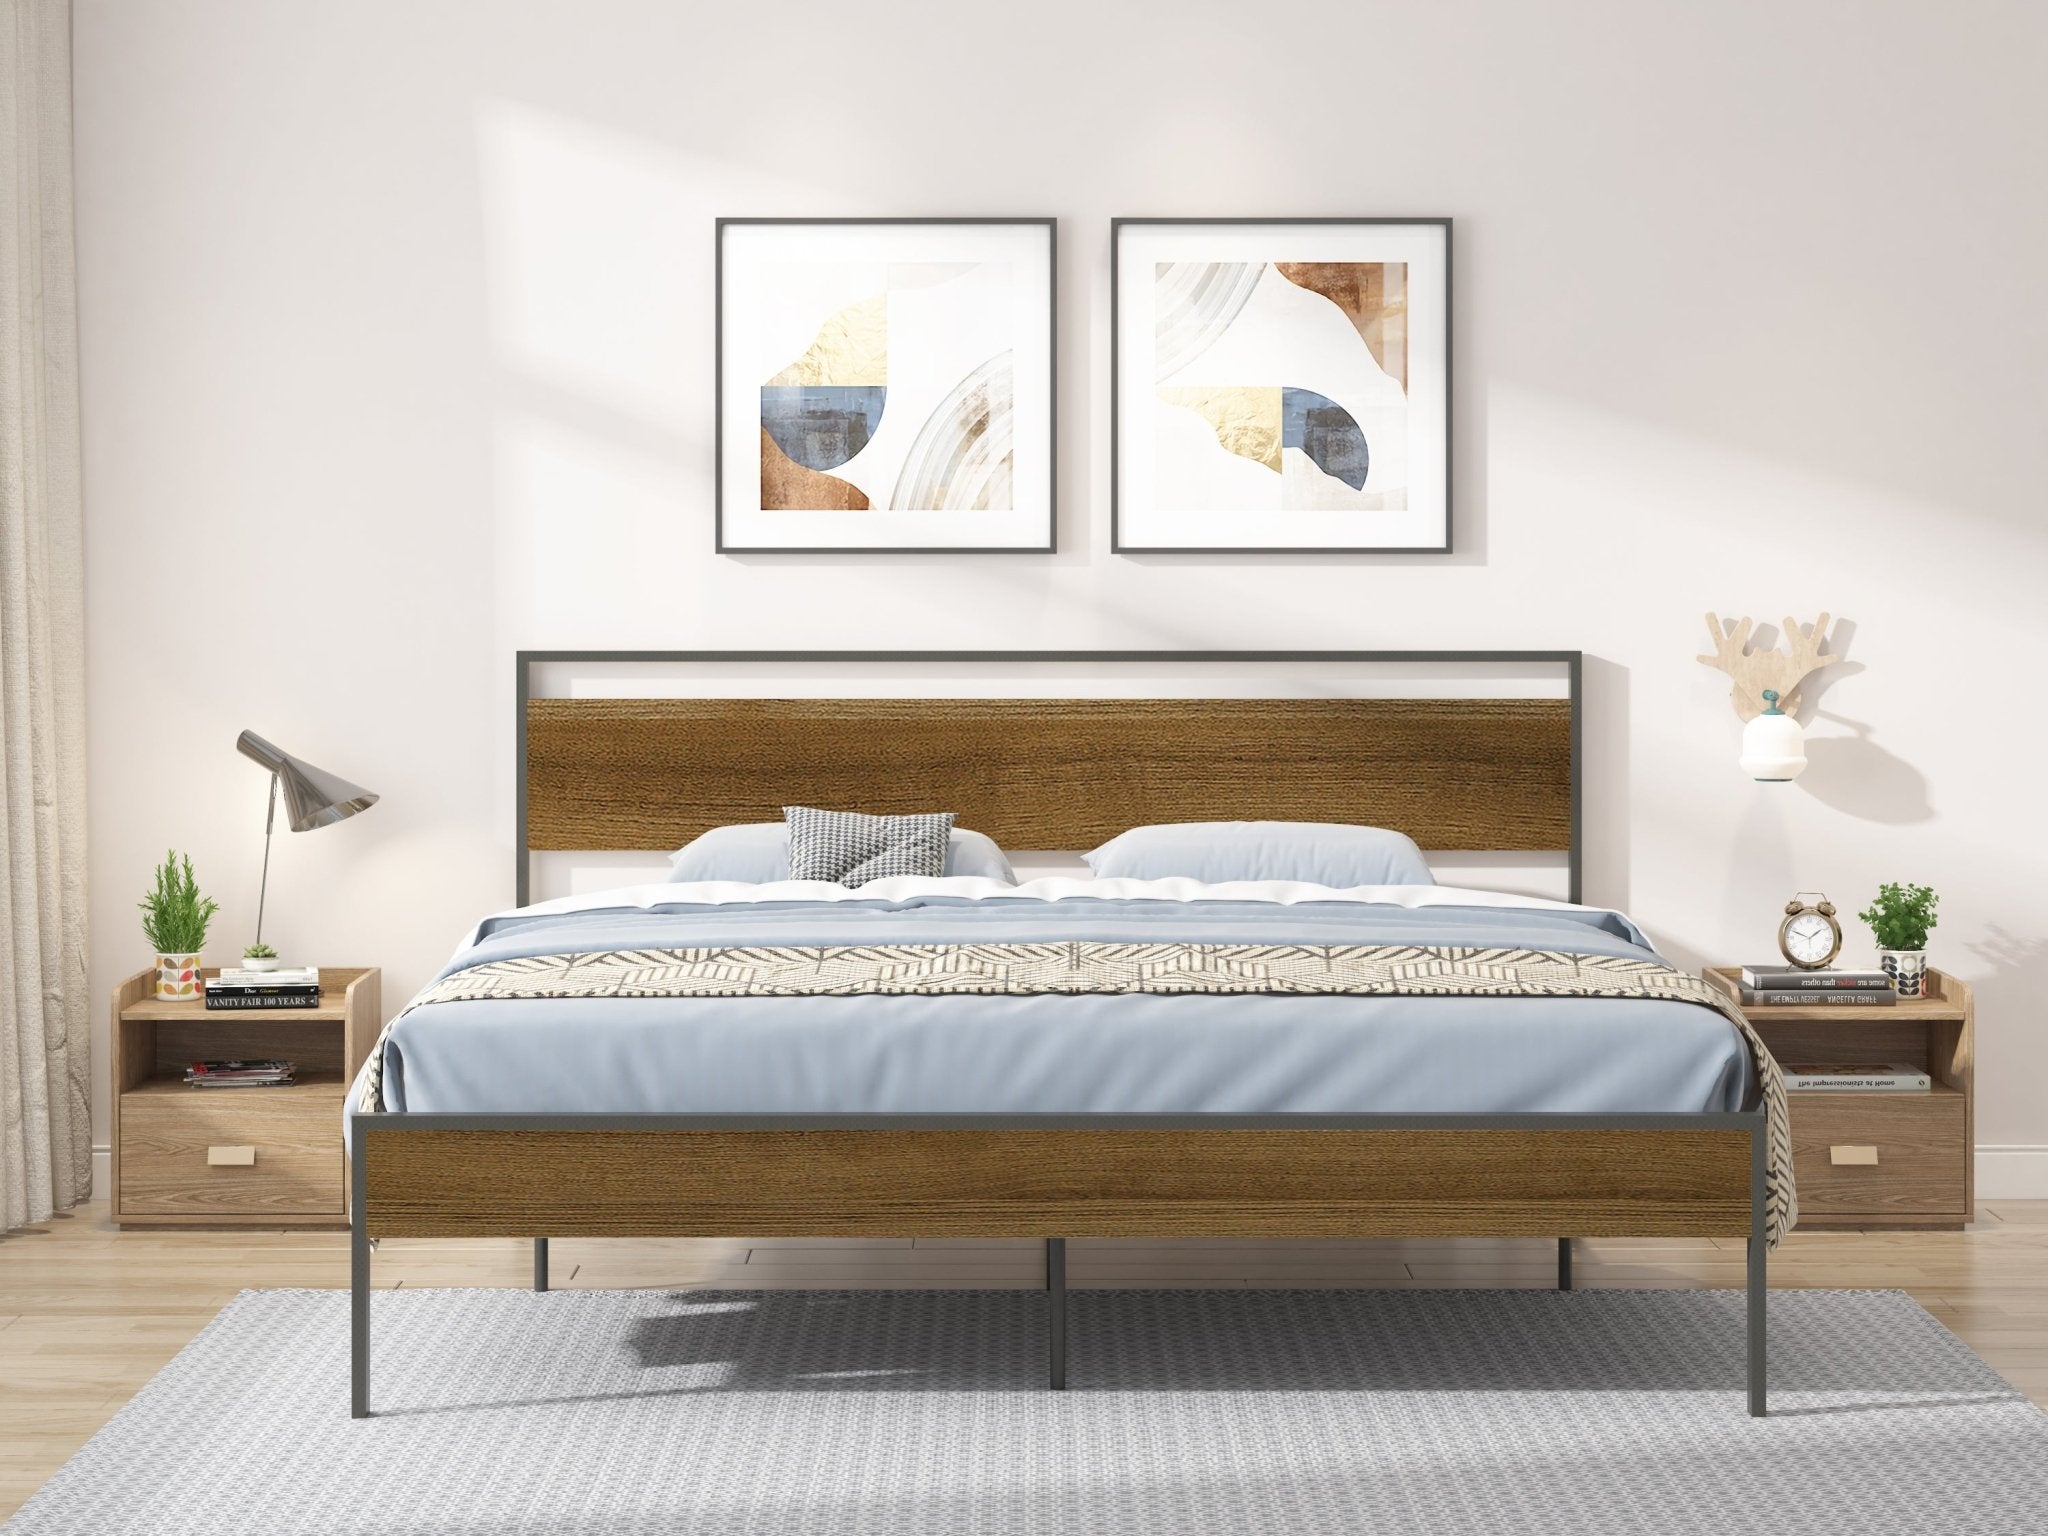 Ceres Metal Bed, Black with Cinnamon Wood Headboard&Footboard, King - Tuesday Morning-Beds & Bed Frames